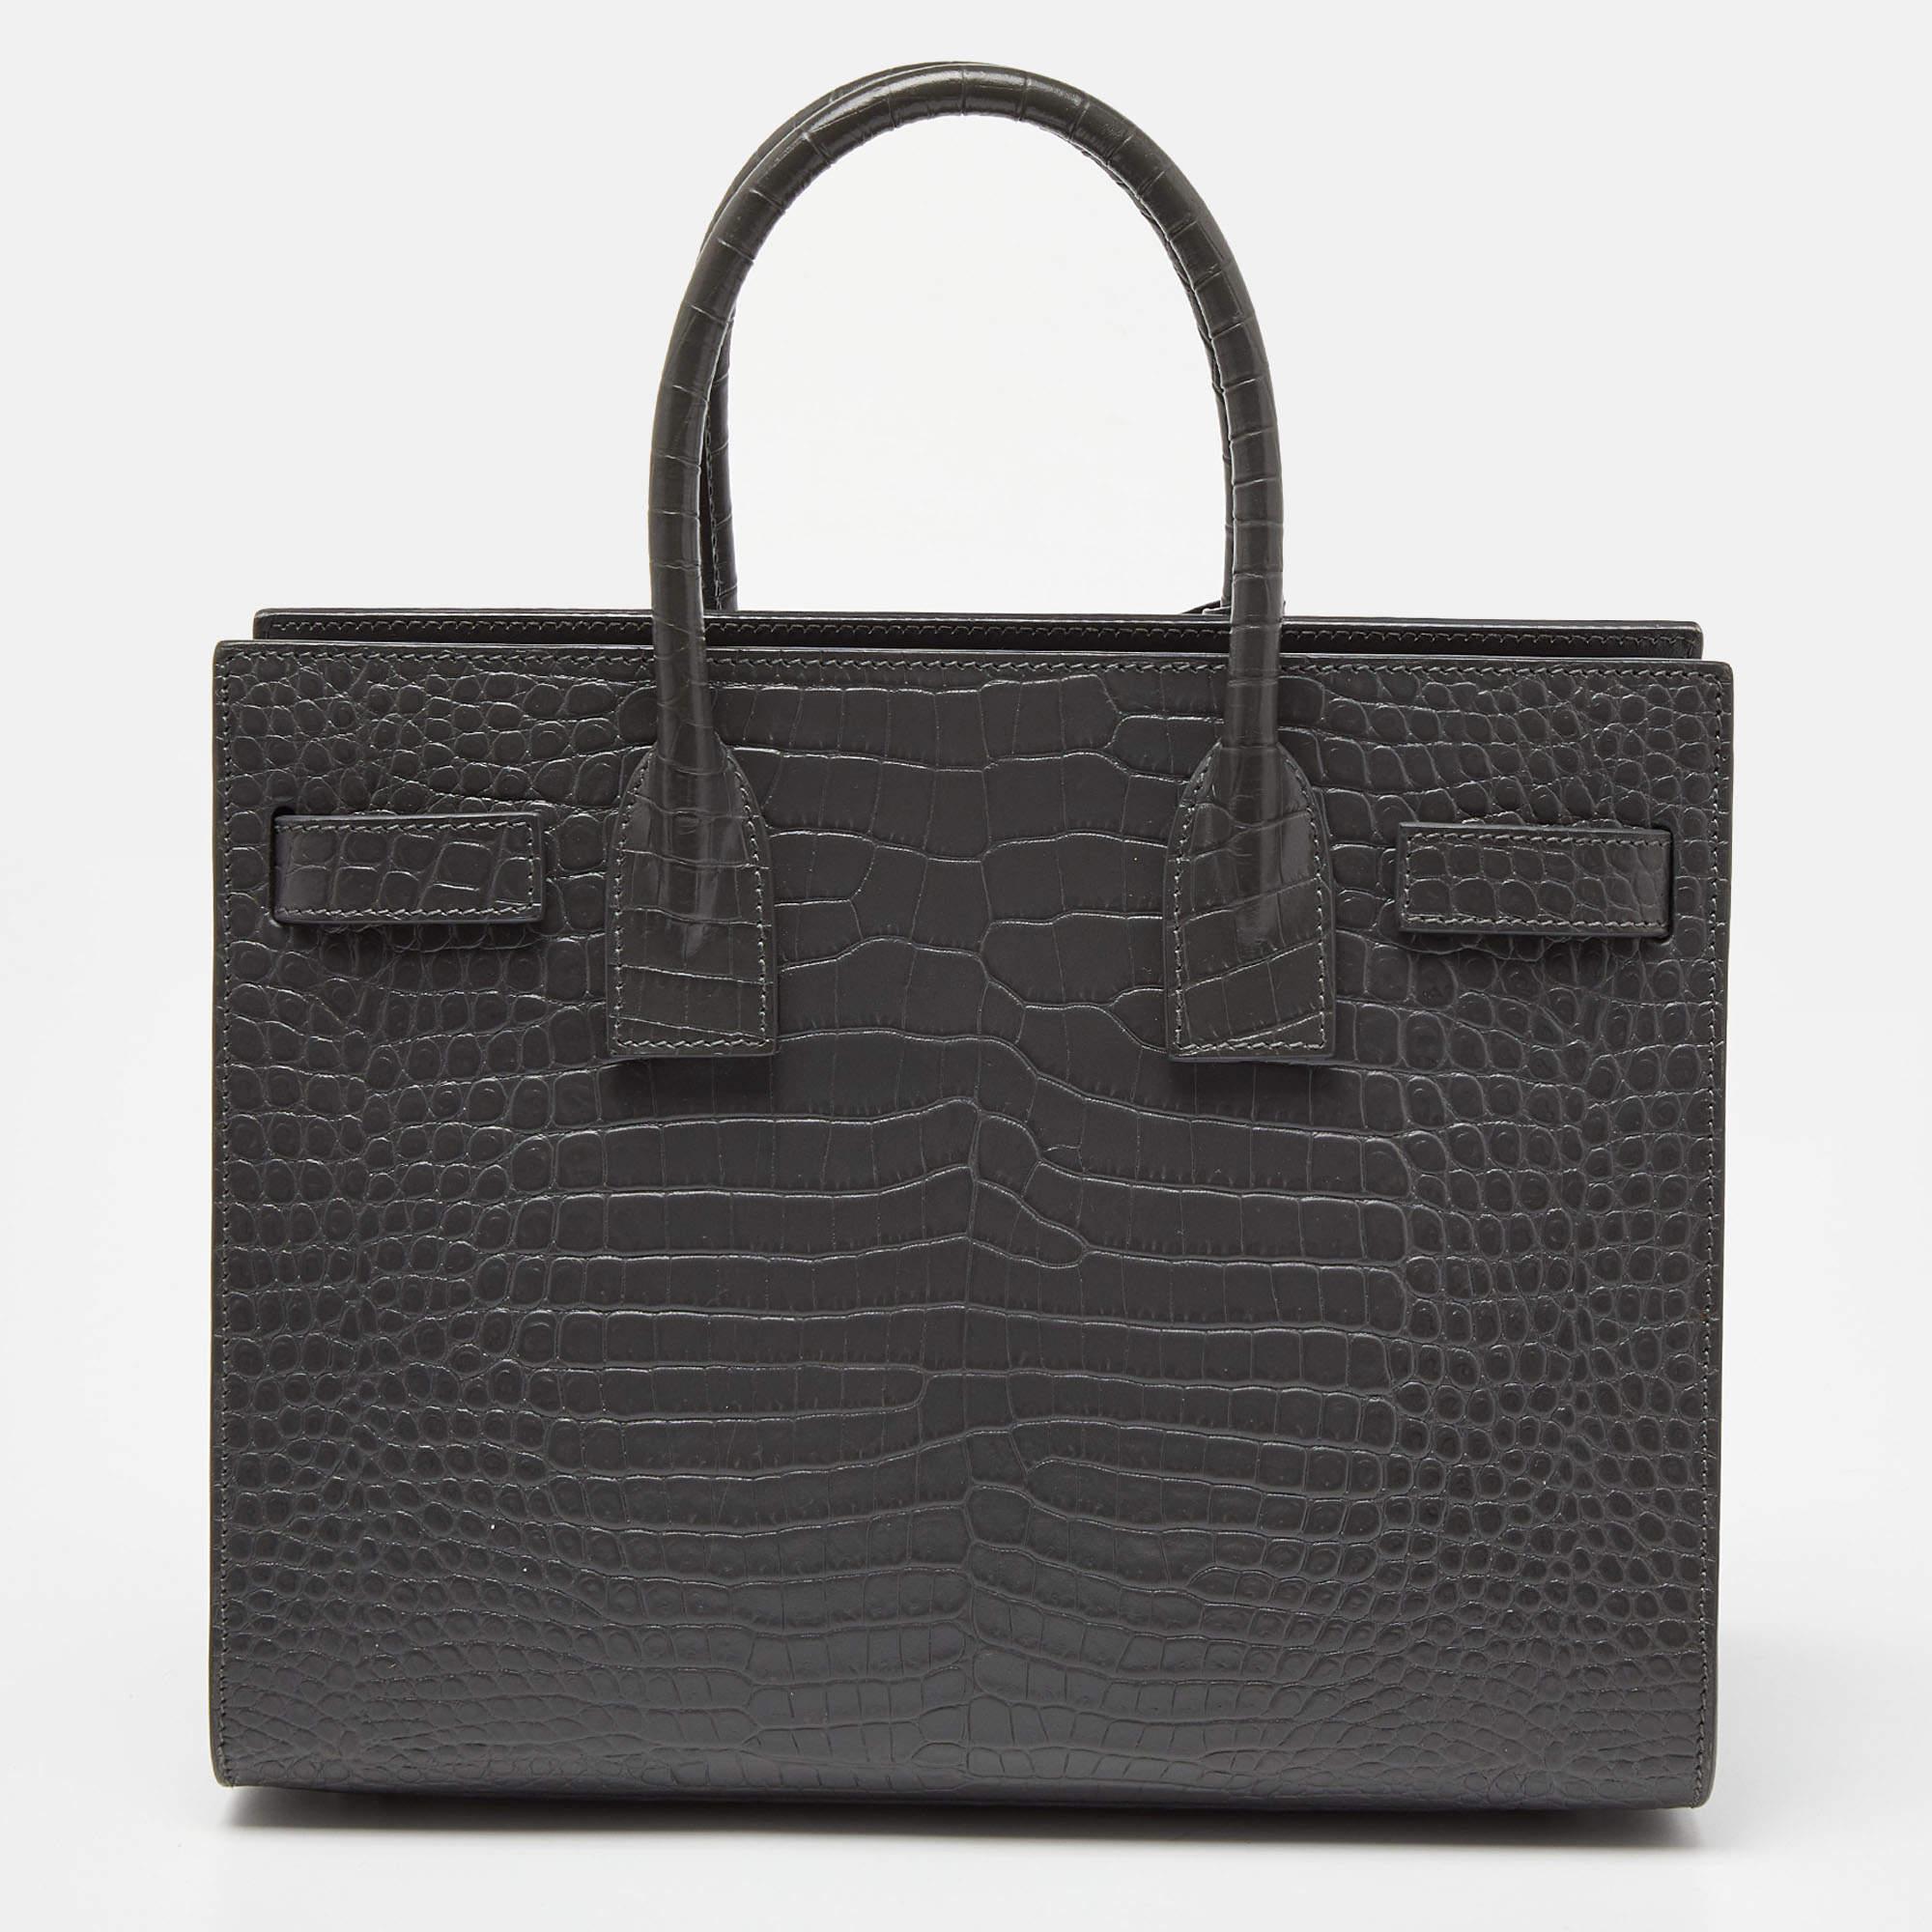 This Baby Classic Sac de Jour tote by Saint Laurent is a beauty. Crafted from grey croc-embossed leather, the bag is held by double top handles and a shoulder strap. The tote comes with a leather-lined interior with enough space to store your